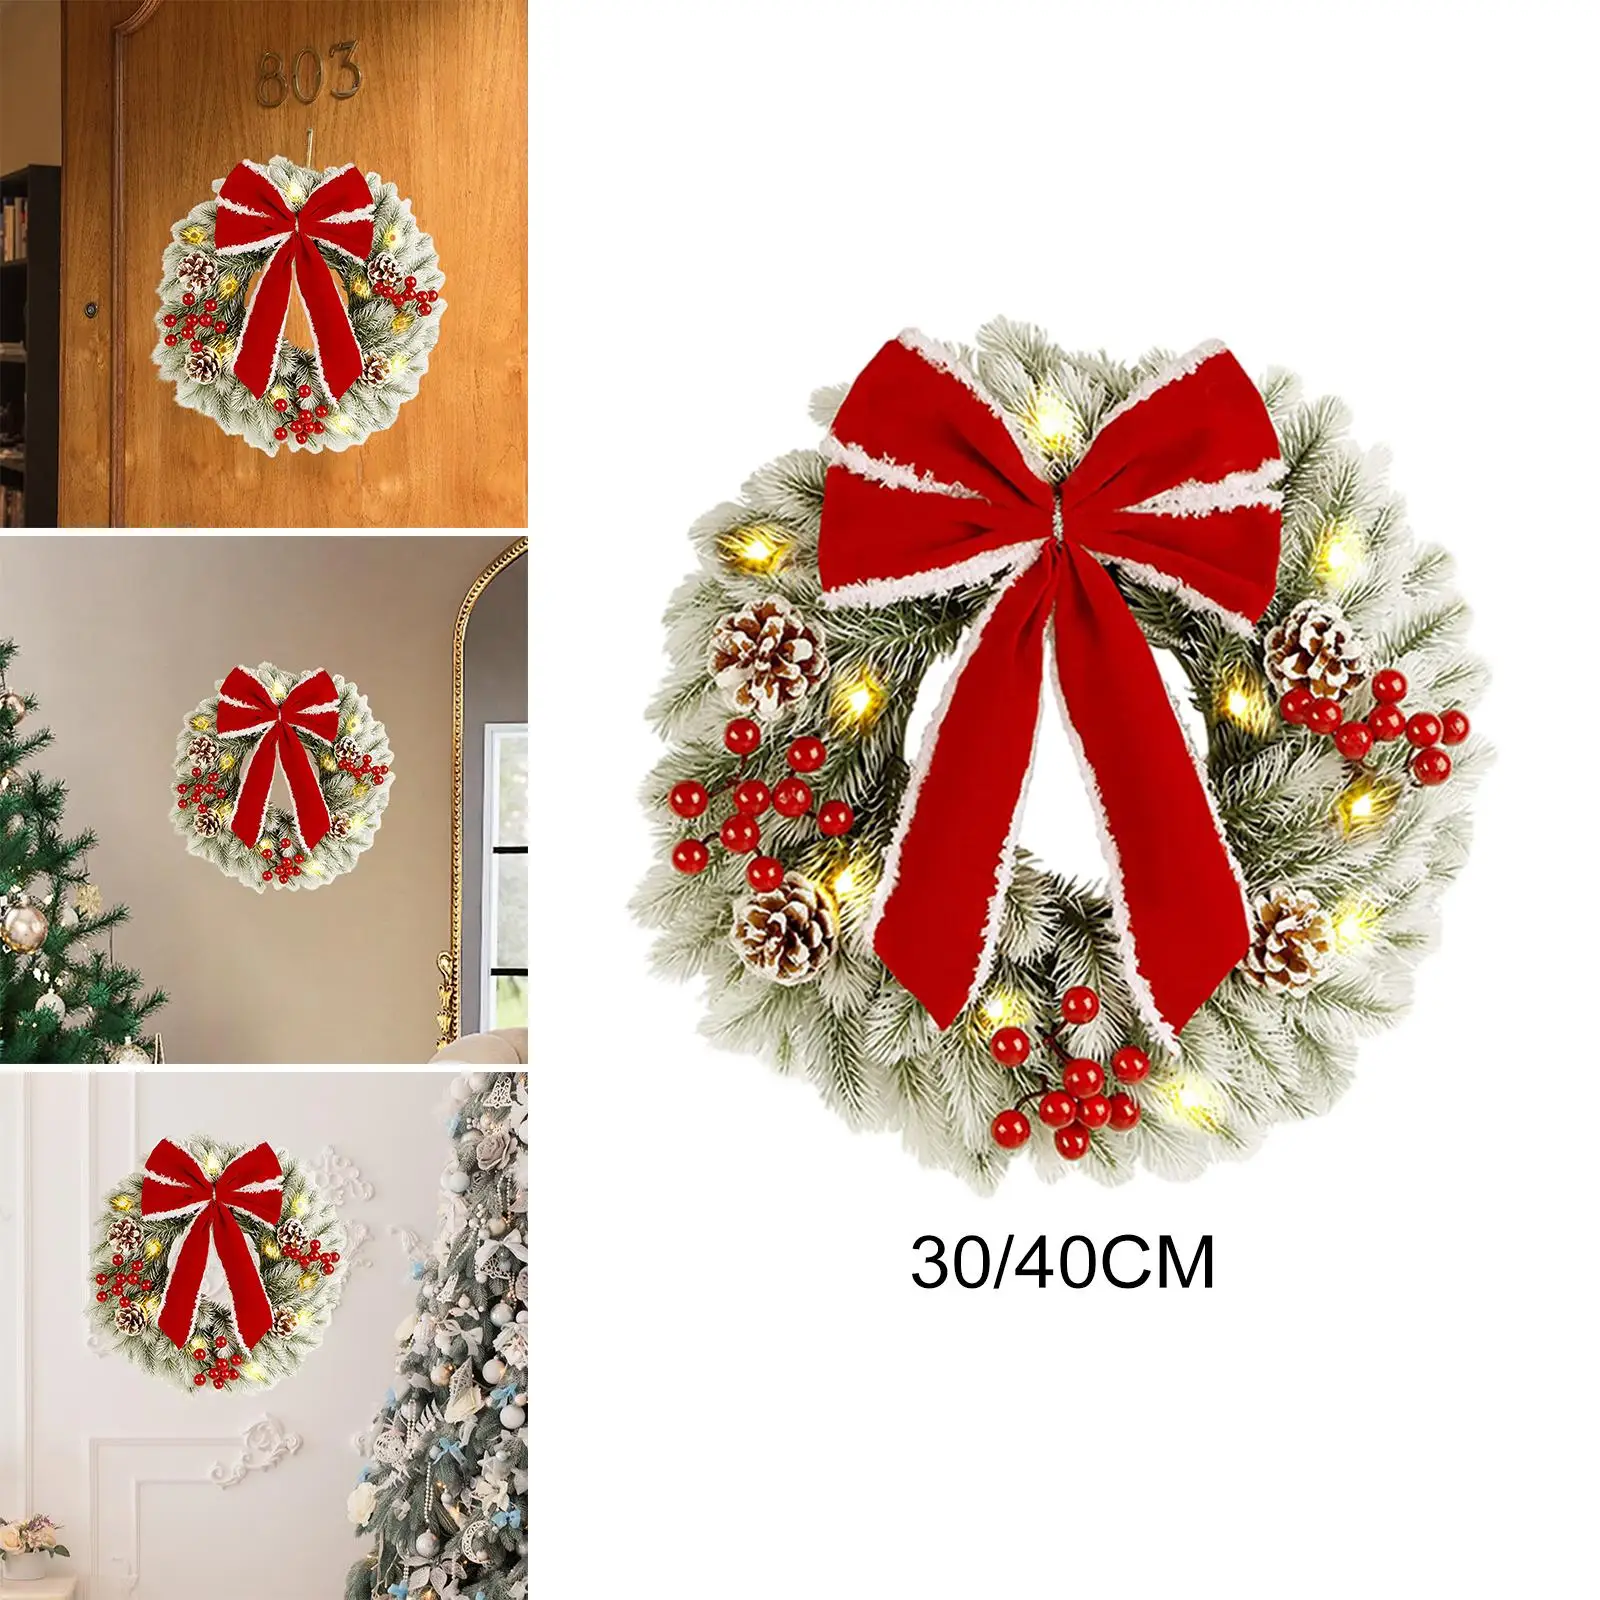 Christmas Wreath with String Light Handcrafted Decorative Front Door Wreath Holiday Garland for Wall Porch Office Party Ornament